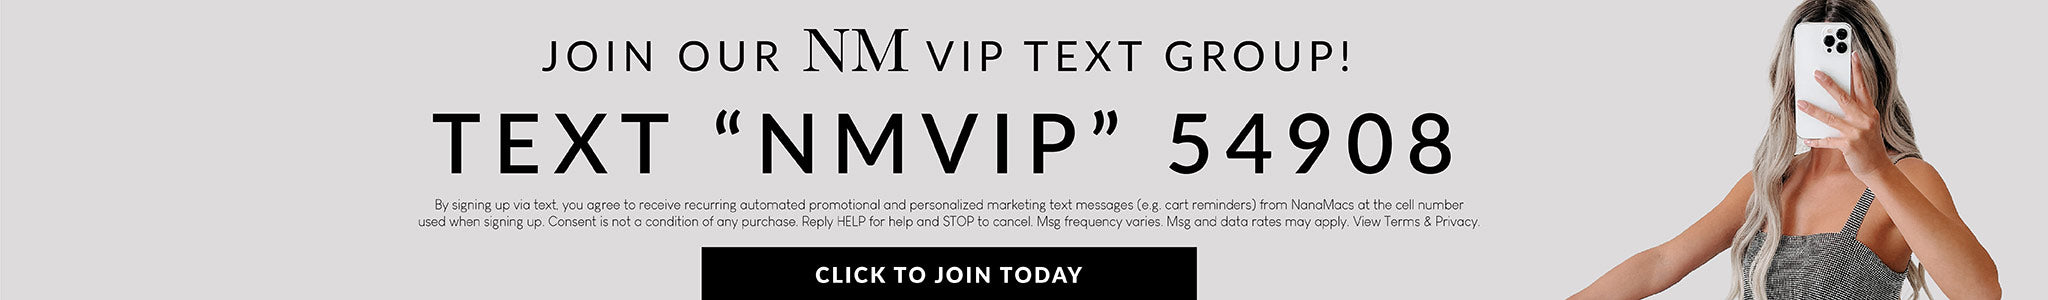 Photo of a model taking a selfie with the headline "Join our NM Vip Text Group". Sub headline states "Text "NMVIP" to 54908. Terms and conditions apply. Call-to-Action "Click to Join Today" links Text Subscribe Page.